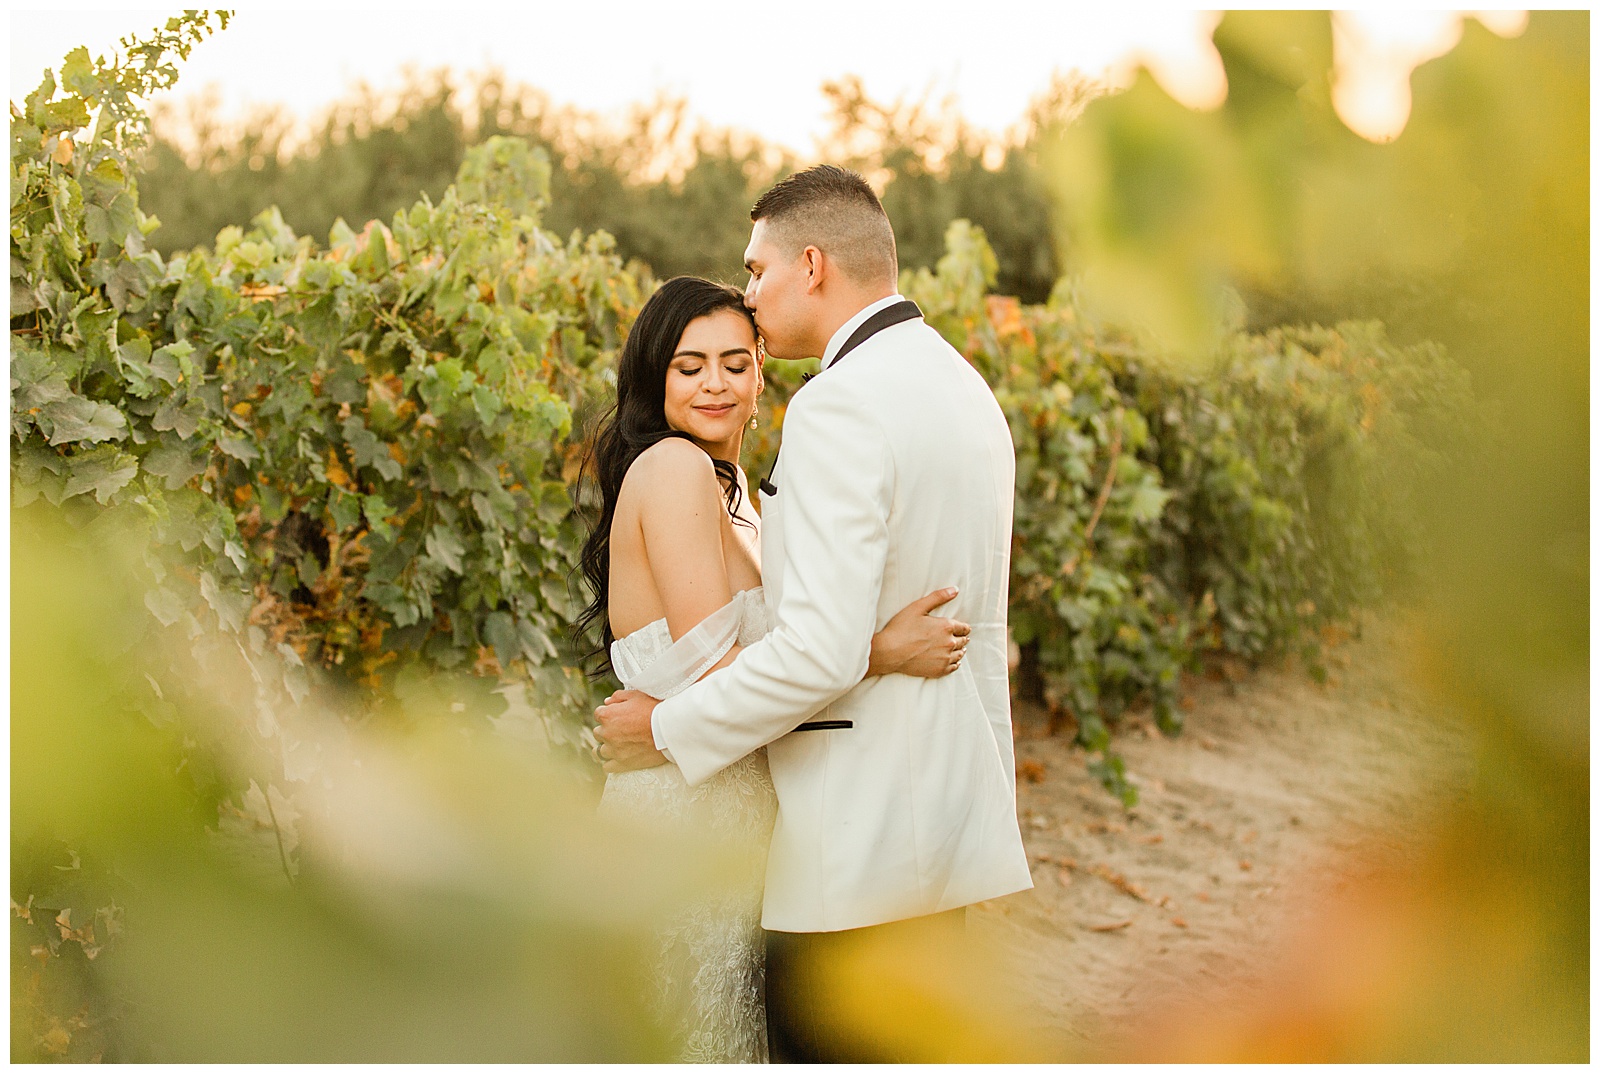 bride and groom embracing in a vineyard during sunset at r wedding and events, the ranch, selma